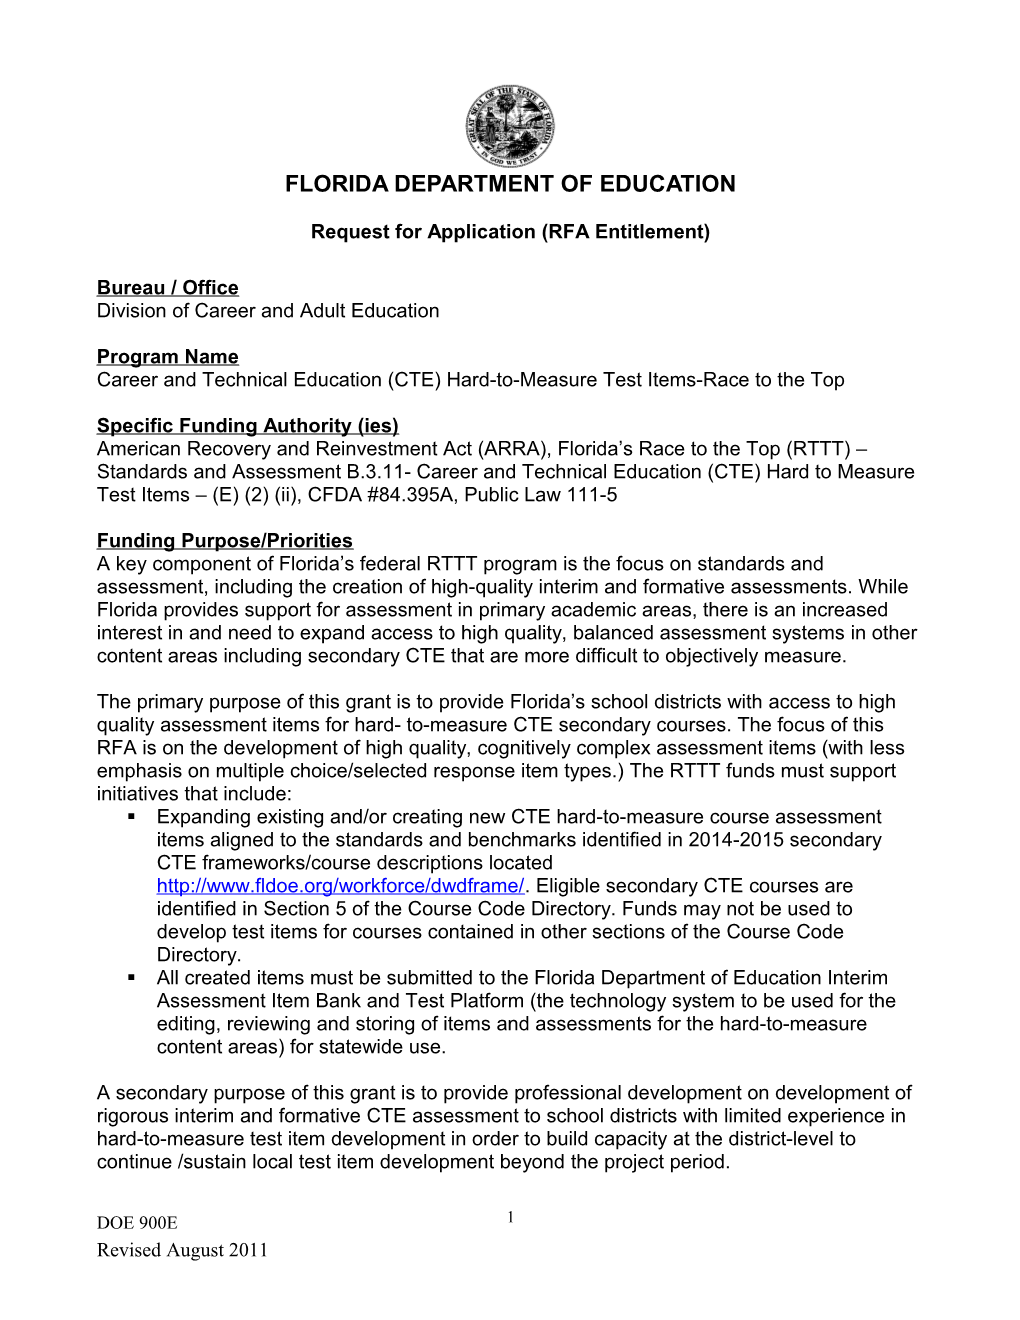 Florida Department of Education s1